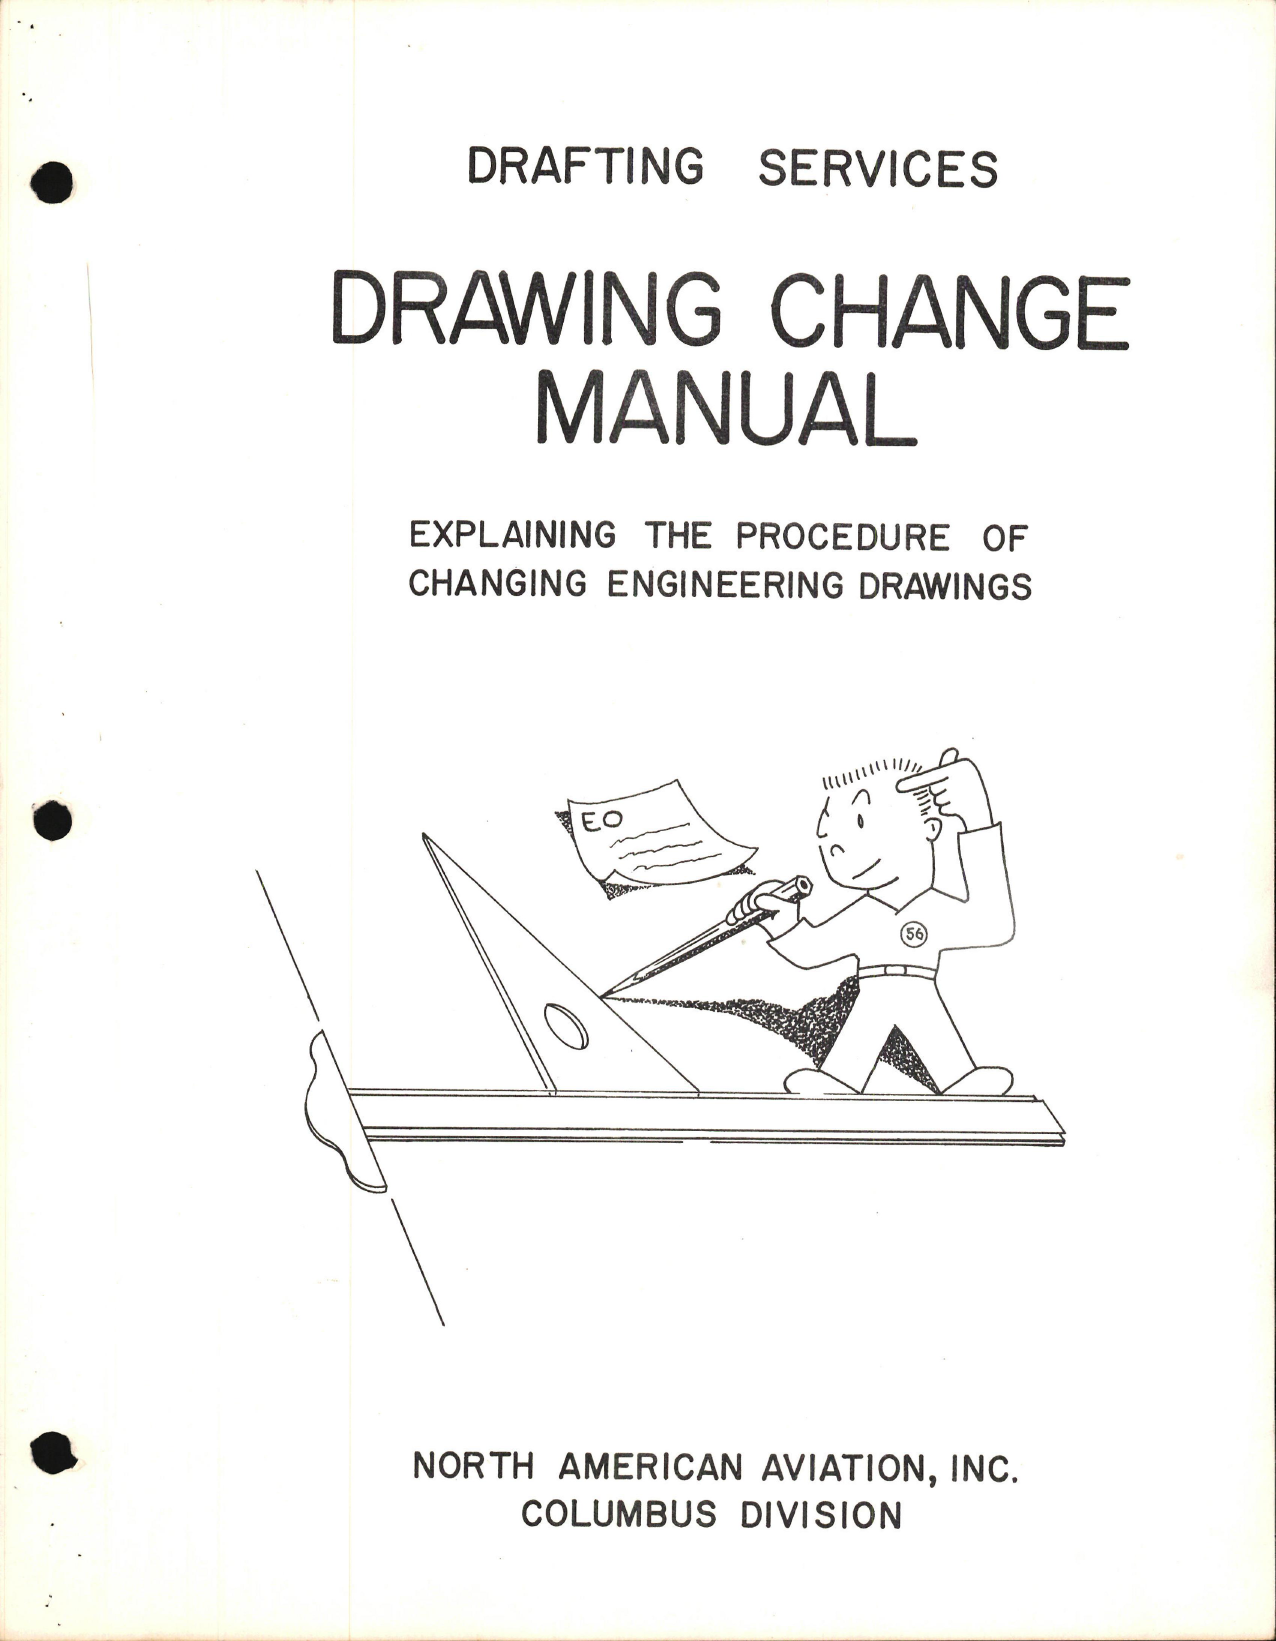 Sample page 1 from AirCorps Library document: North American Aviation Drafting Services - Drawing Change Manual